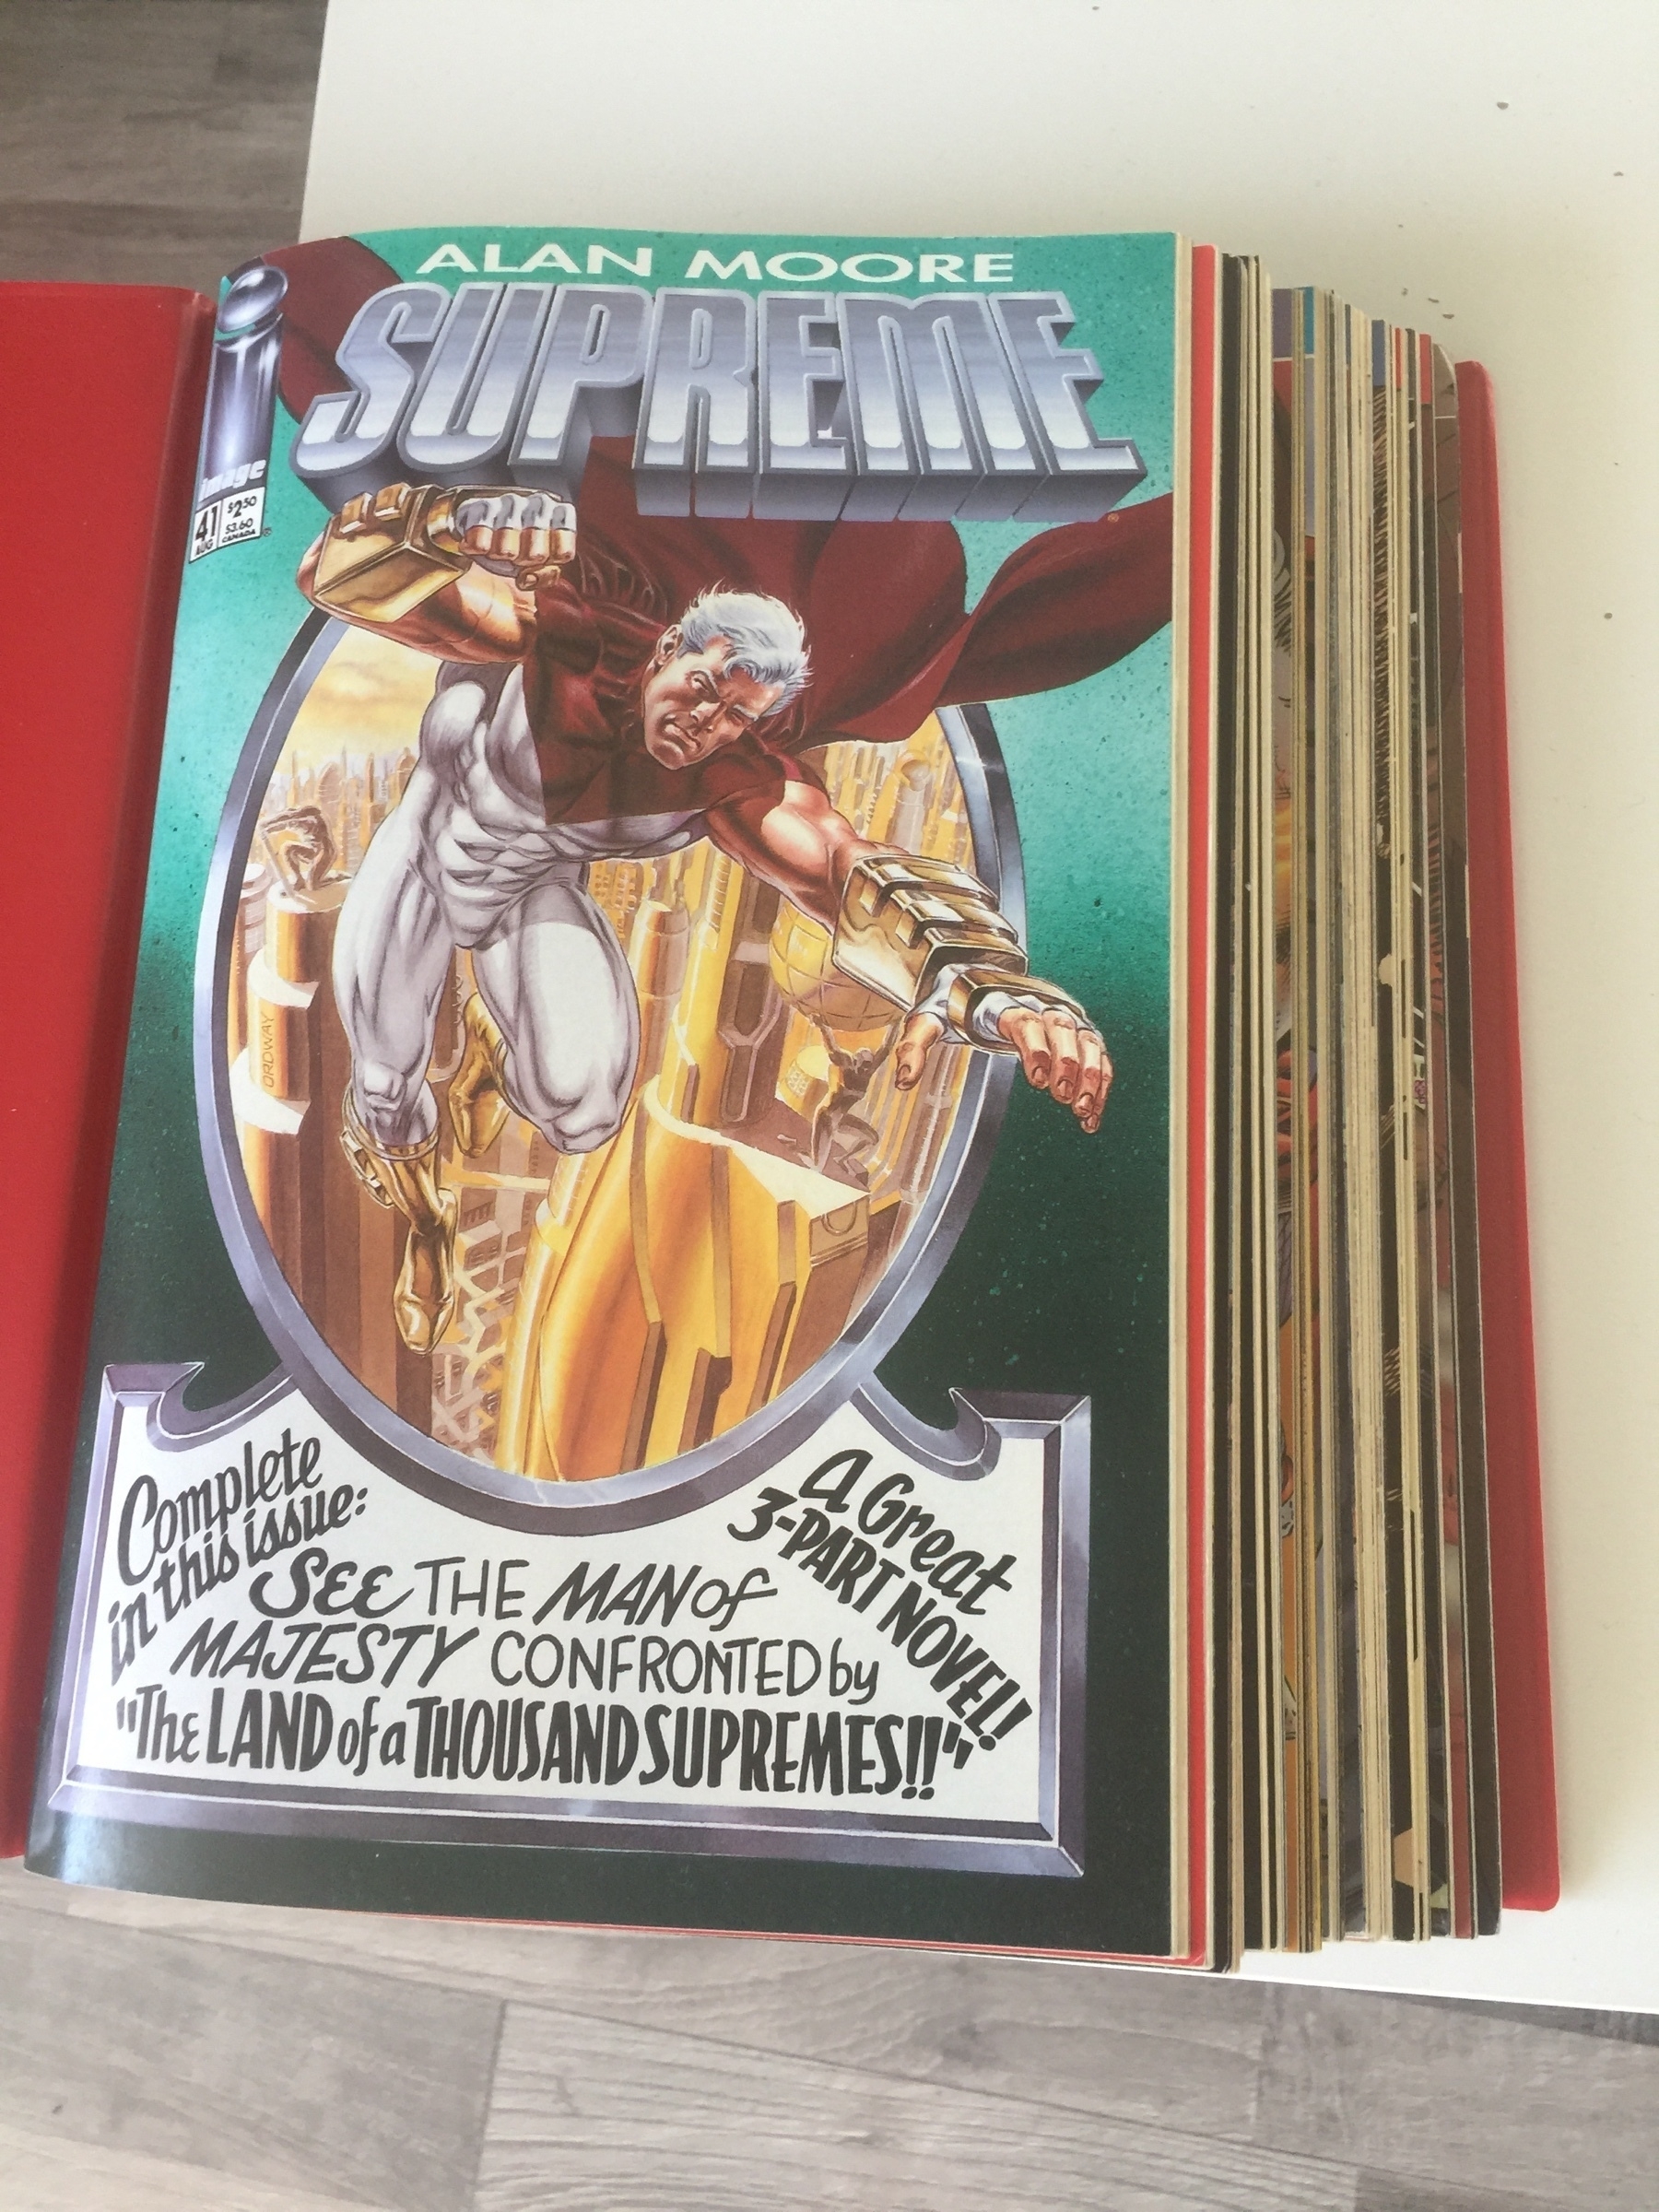 A binder containing a stack of comics. The topmost one is titled "Alan Moore: Supreme"